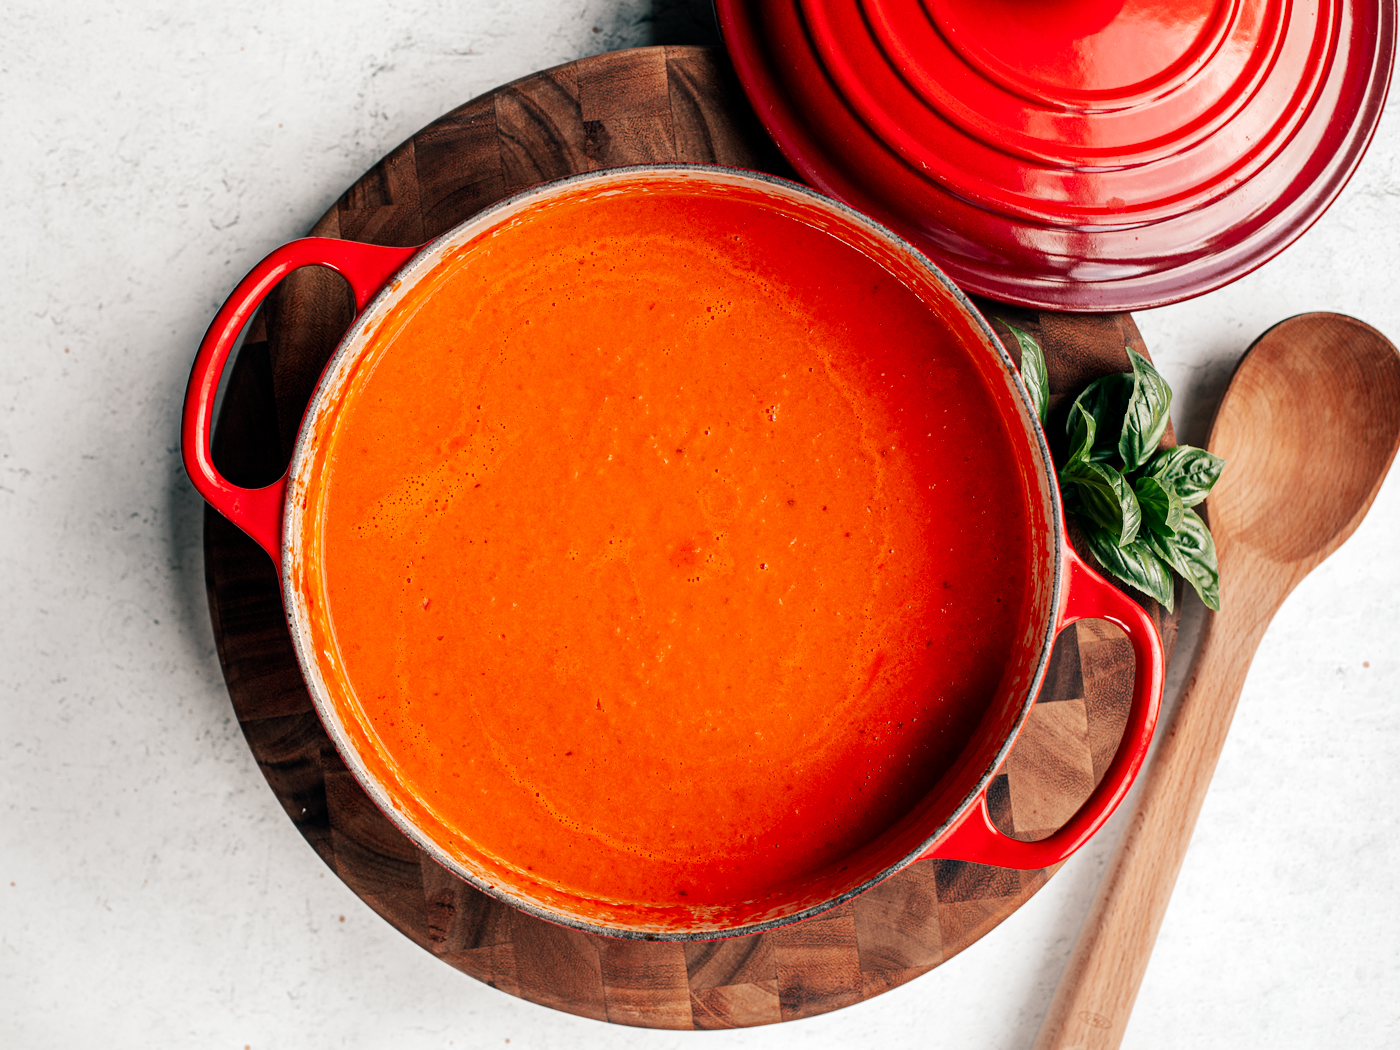 Big pot of tomato soup on a wooden cutting board.